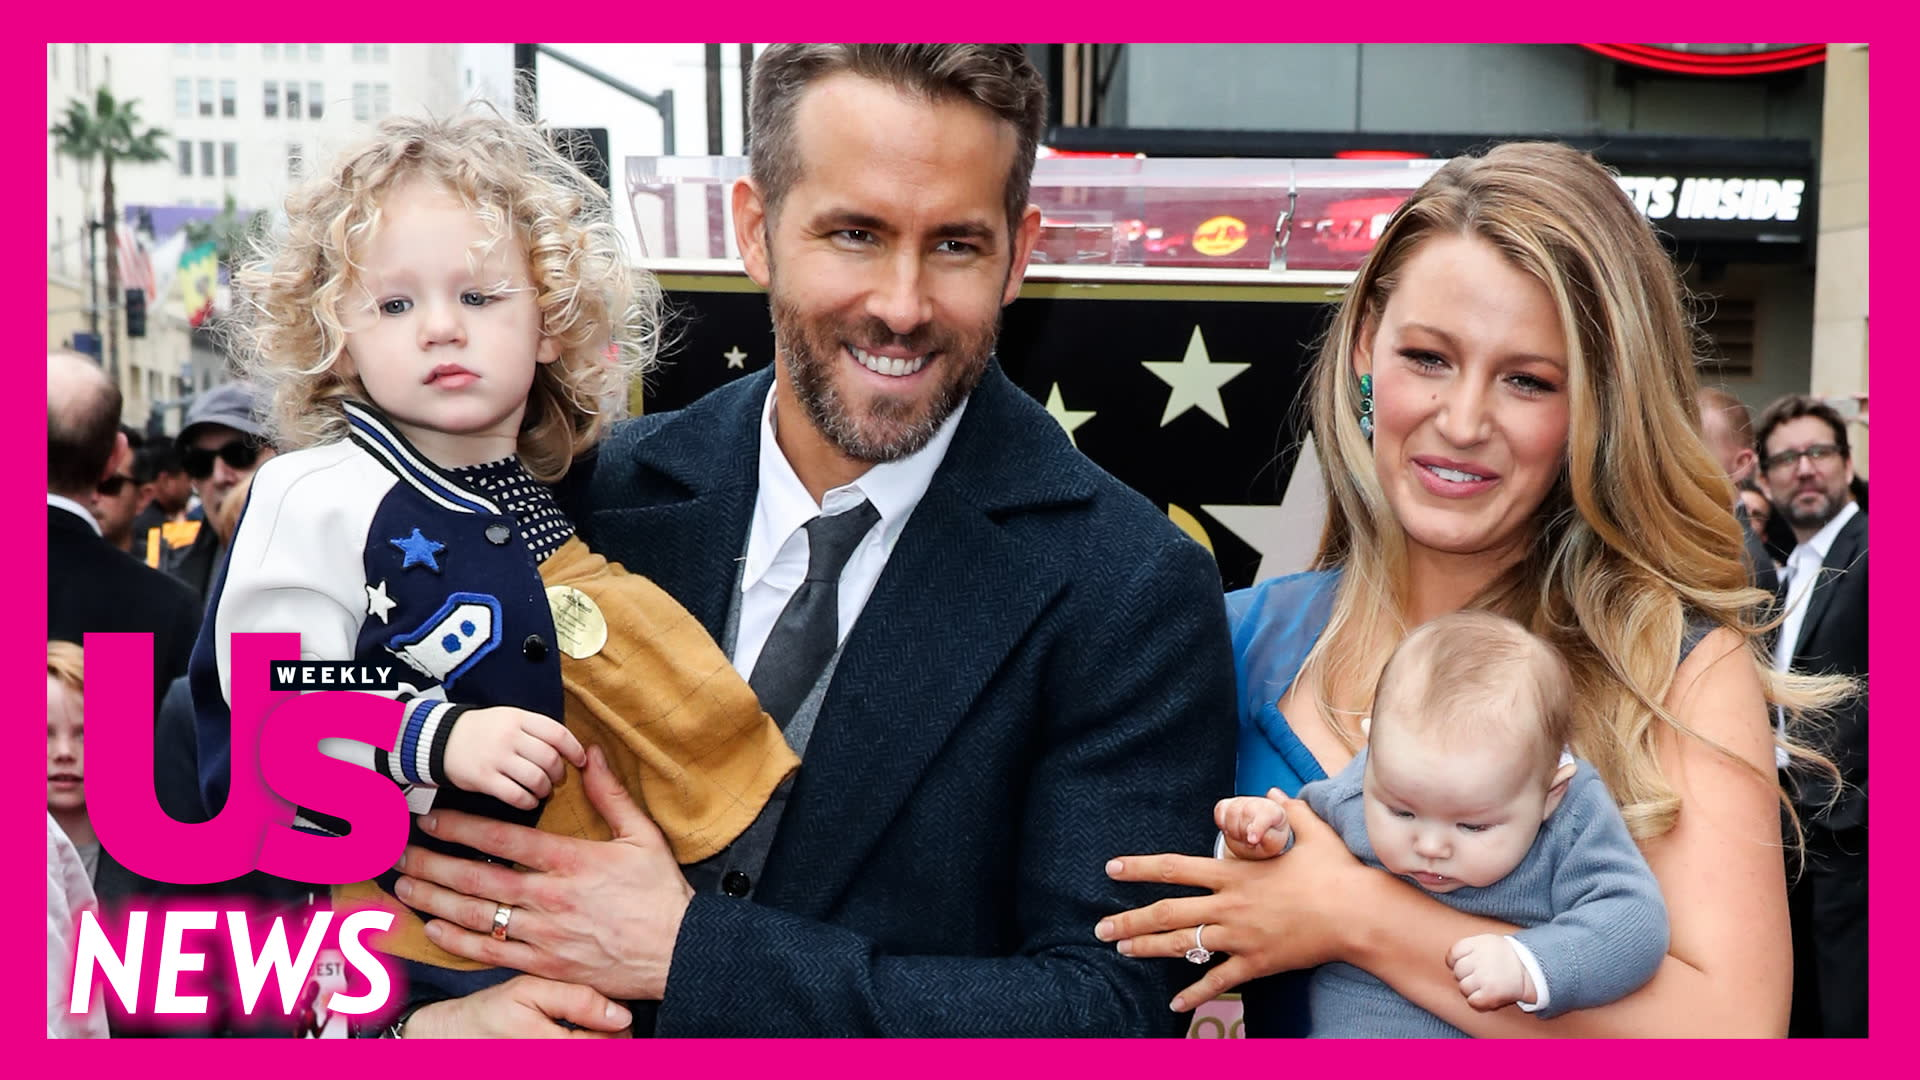 Blake Lively has four kids now and she's tired, which is understandable